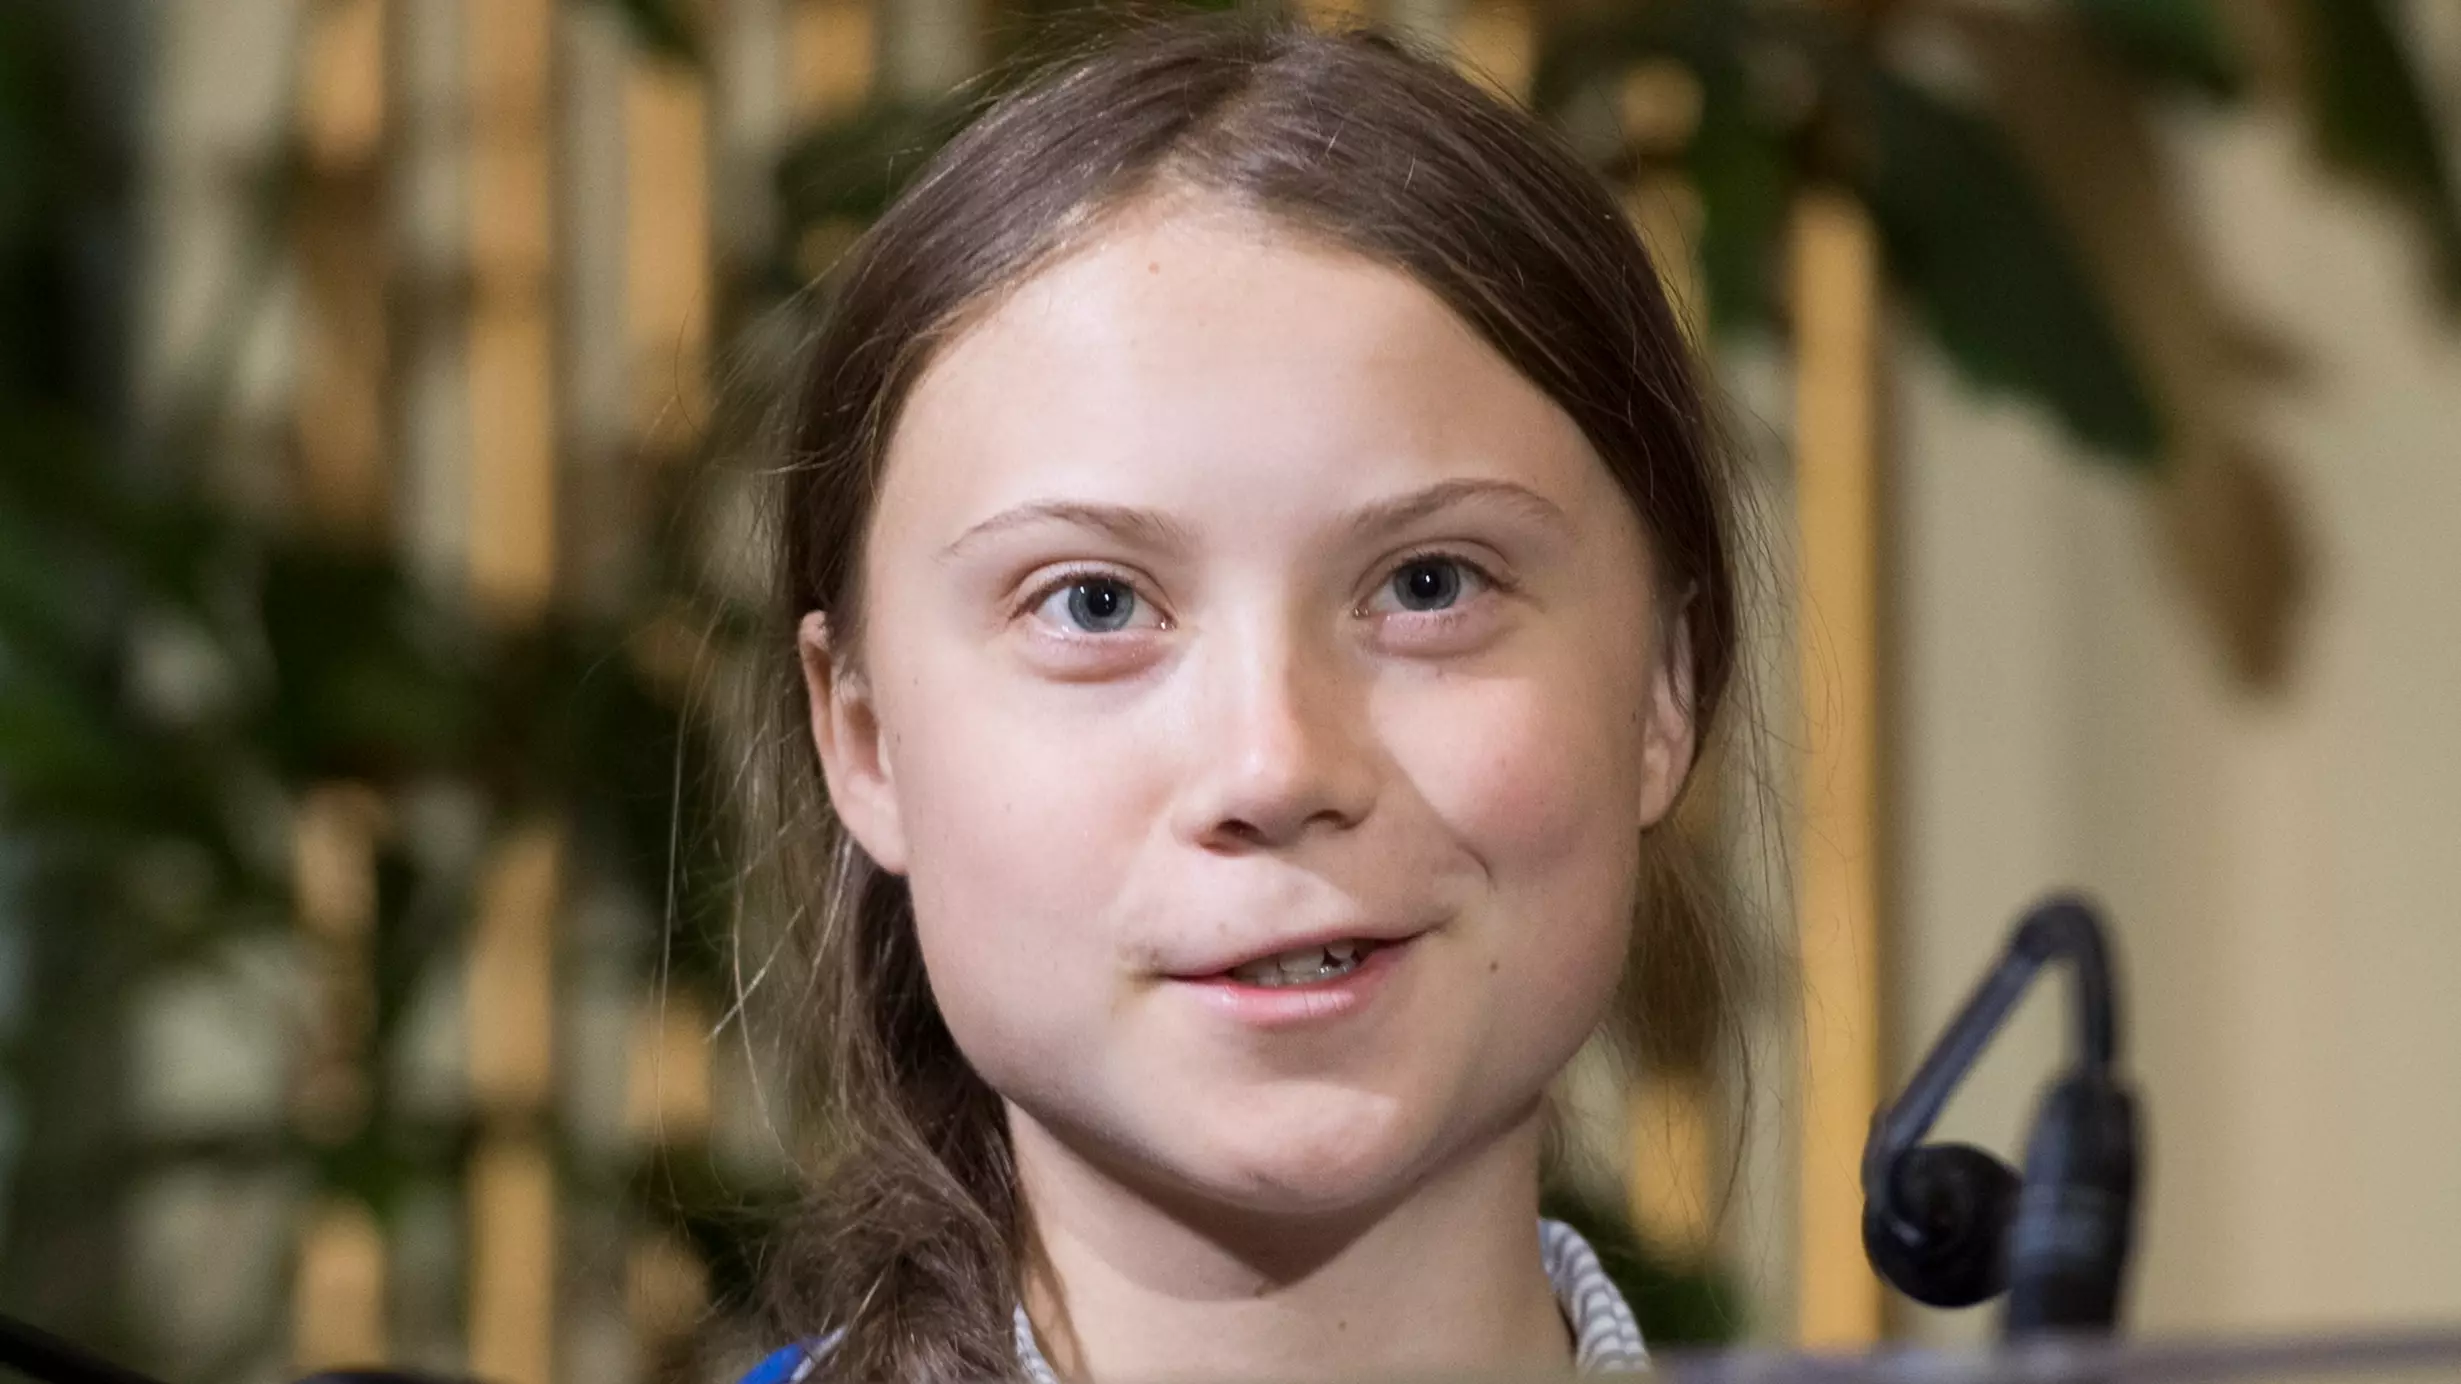 Greta Thunberg Mocks Russia's President After He Called Her A 'Poorly Informed Teenager'